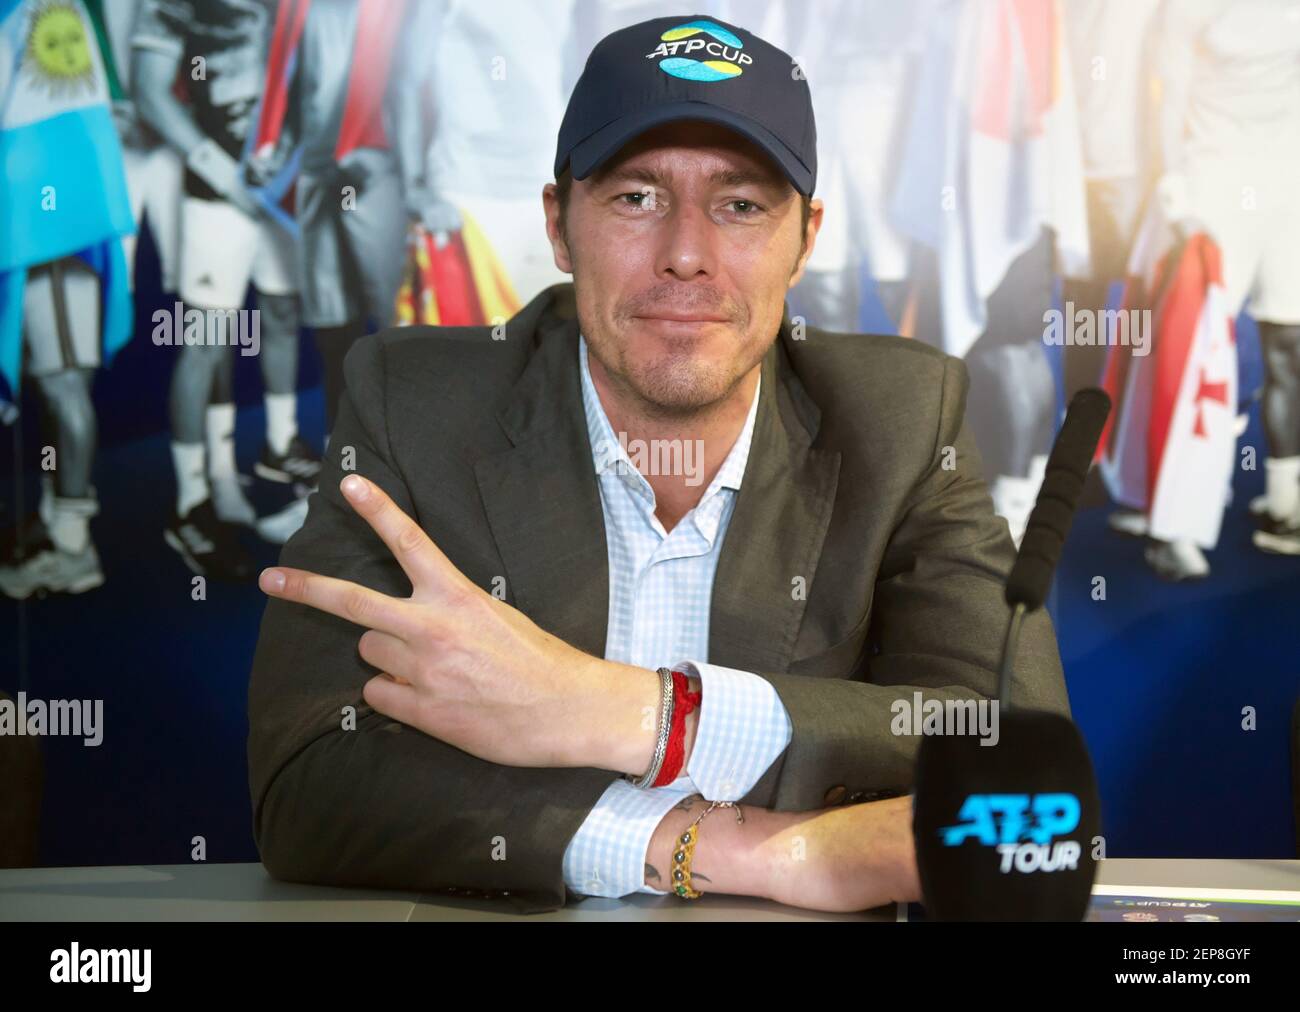 Press conference of national teams' captains at the new ATP team  competition of the final ATP tournament (Association of Tennis  Professionals). Russian national team captain, Russian tennis player Marat  Safin during the